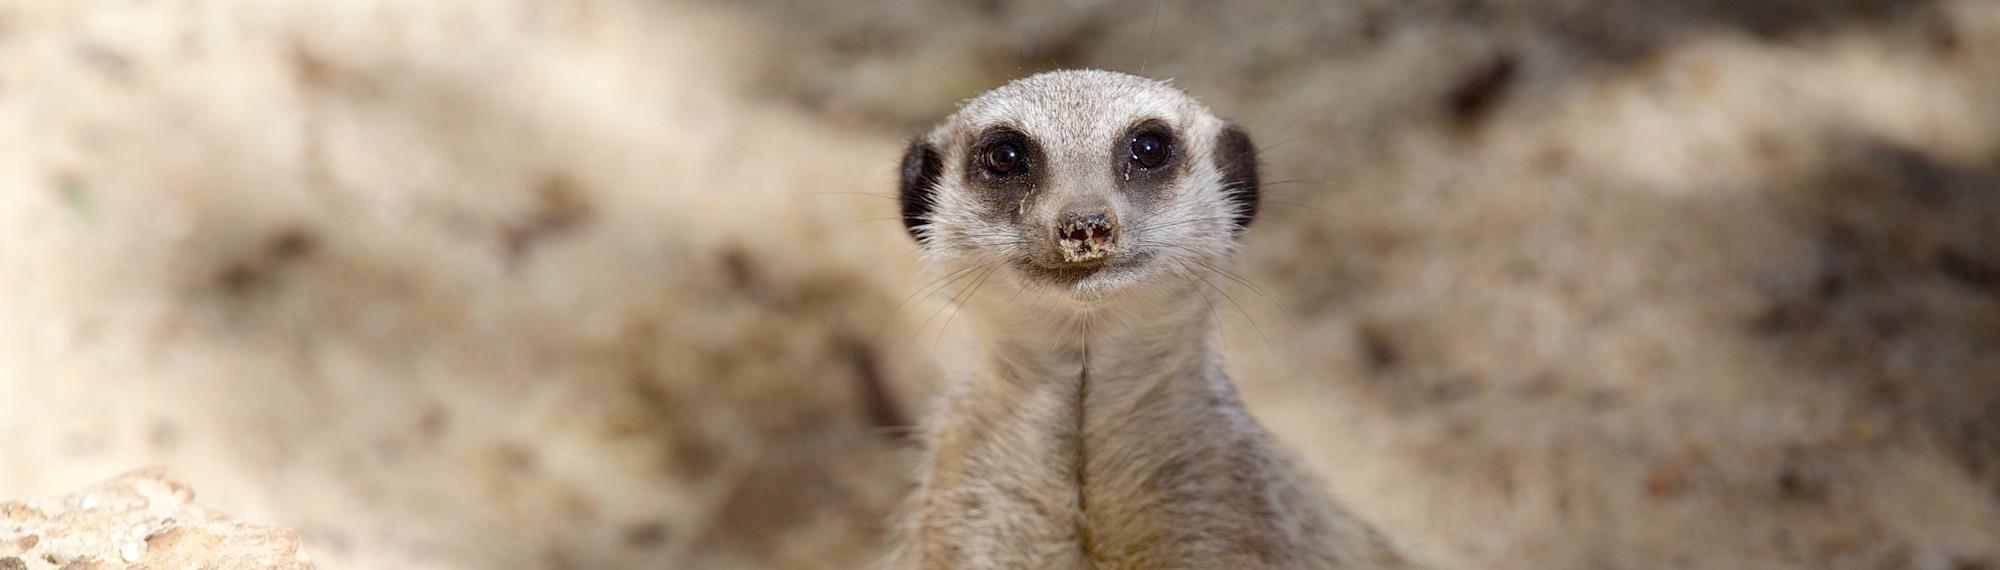 A young Meerkat looking at the camera, with a sandy background.